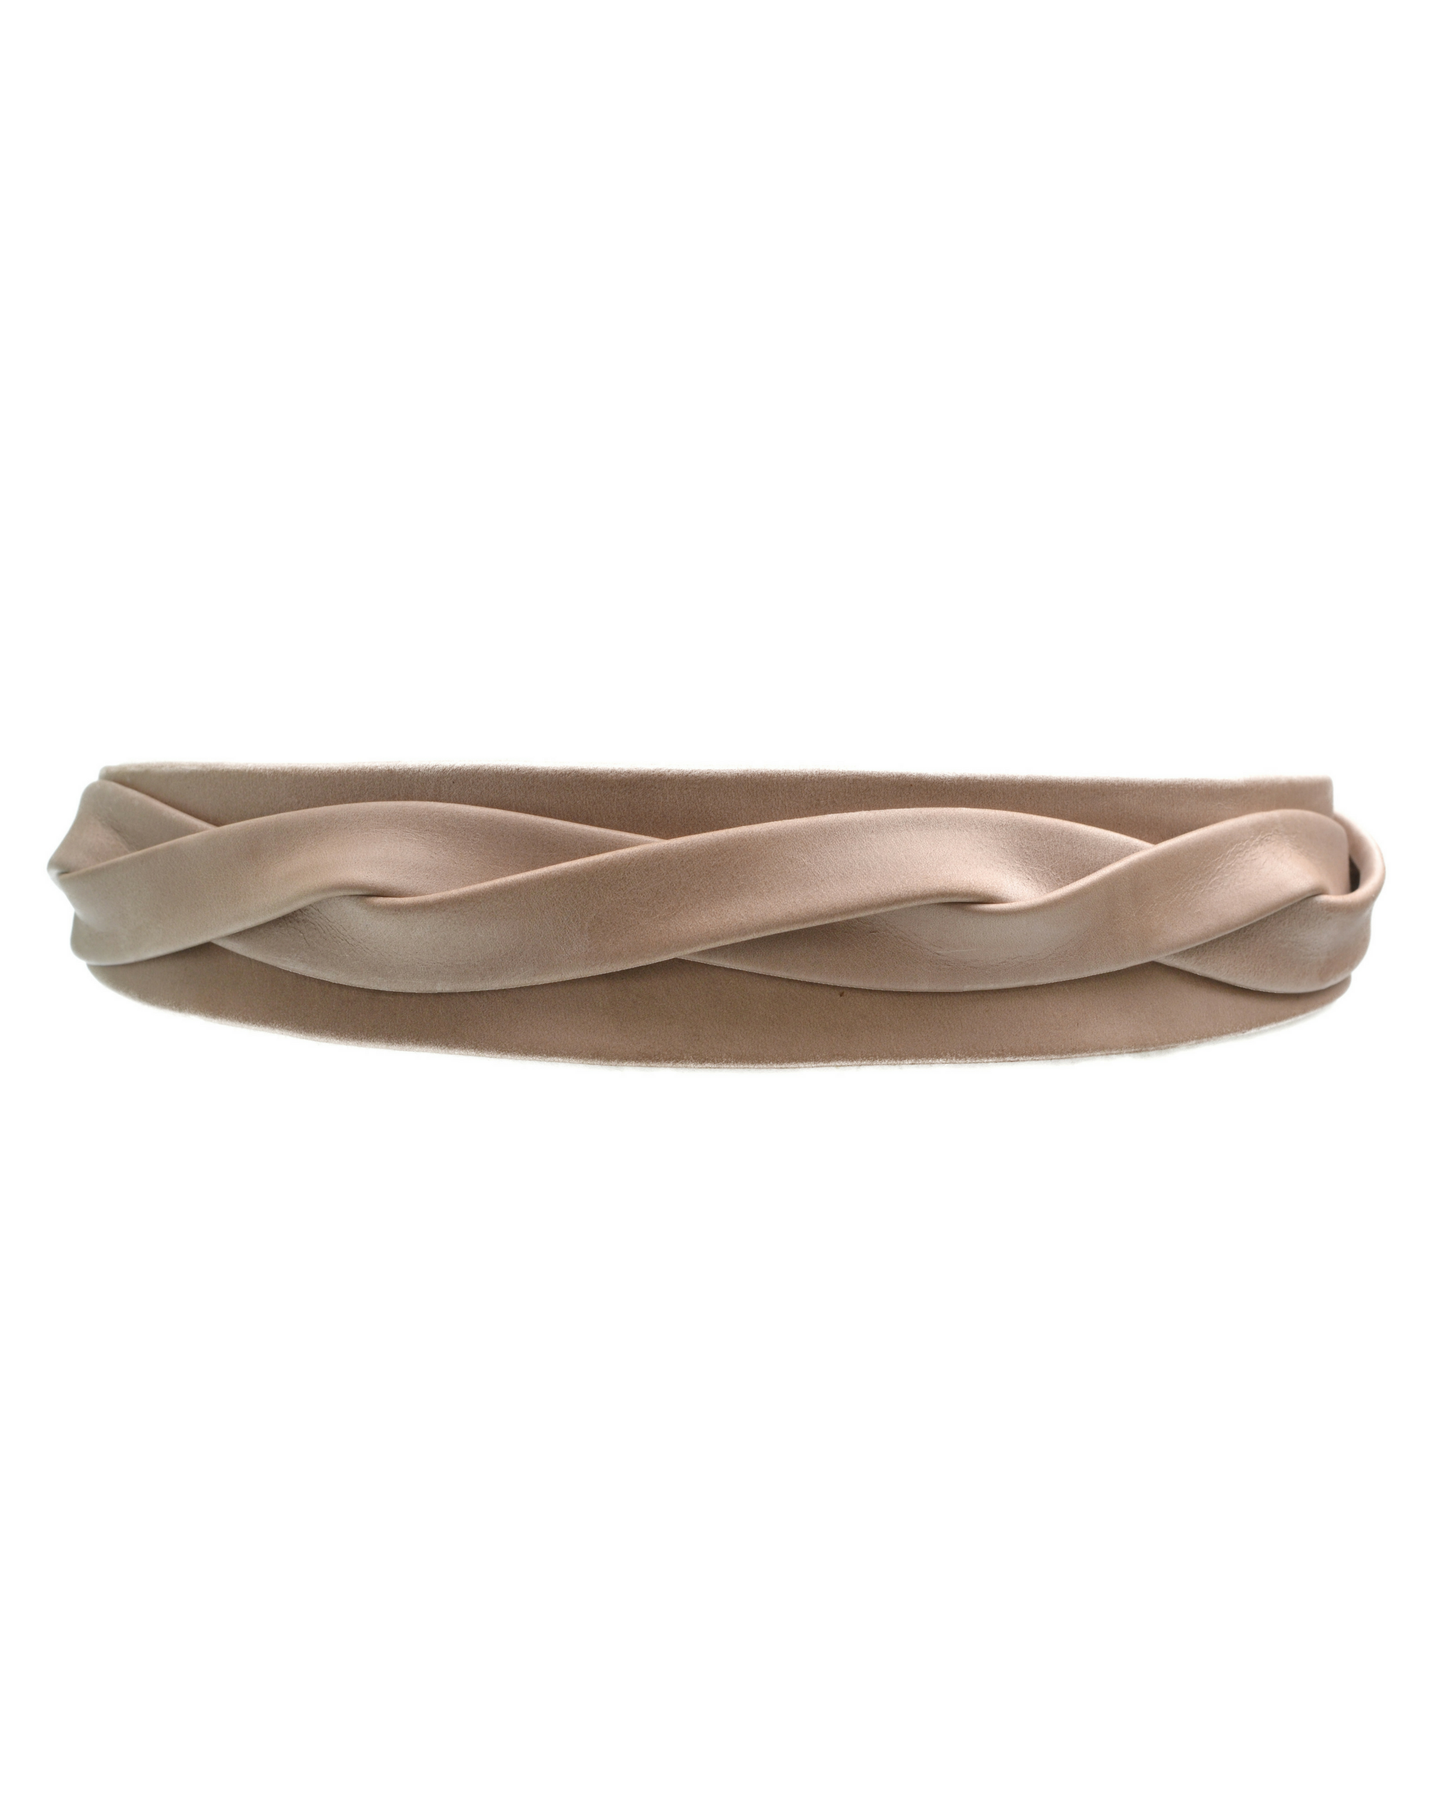 ADA Collection Belts - Midi Wrap Belt - Taupe